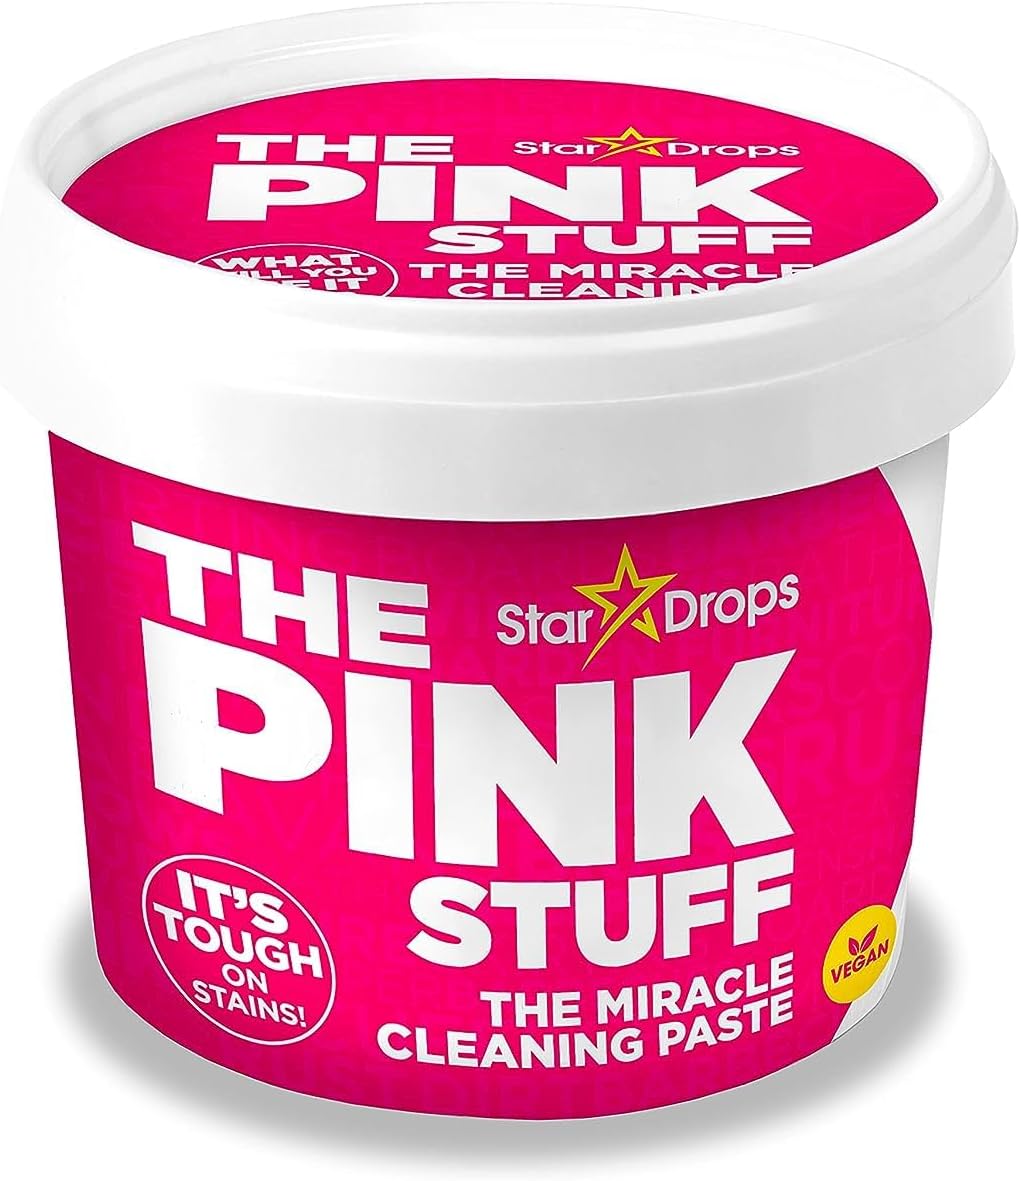 The Miracle All Purpose Cleaning Paste